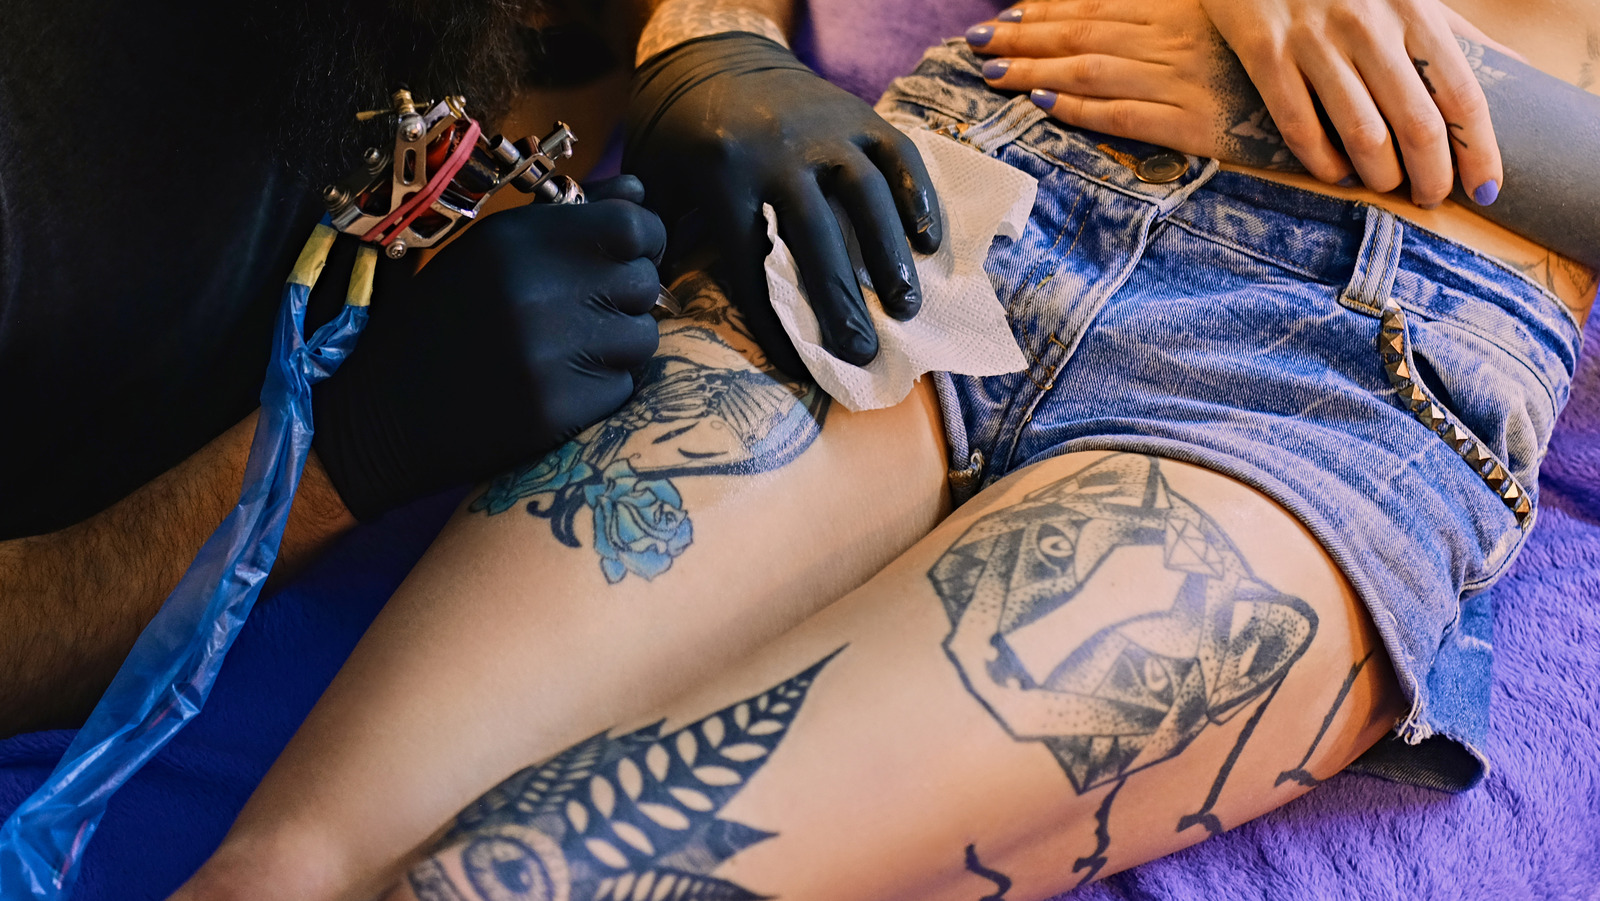 Most painful places to get a tattoo: A tattoo pain chart guide